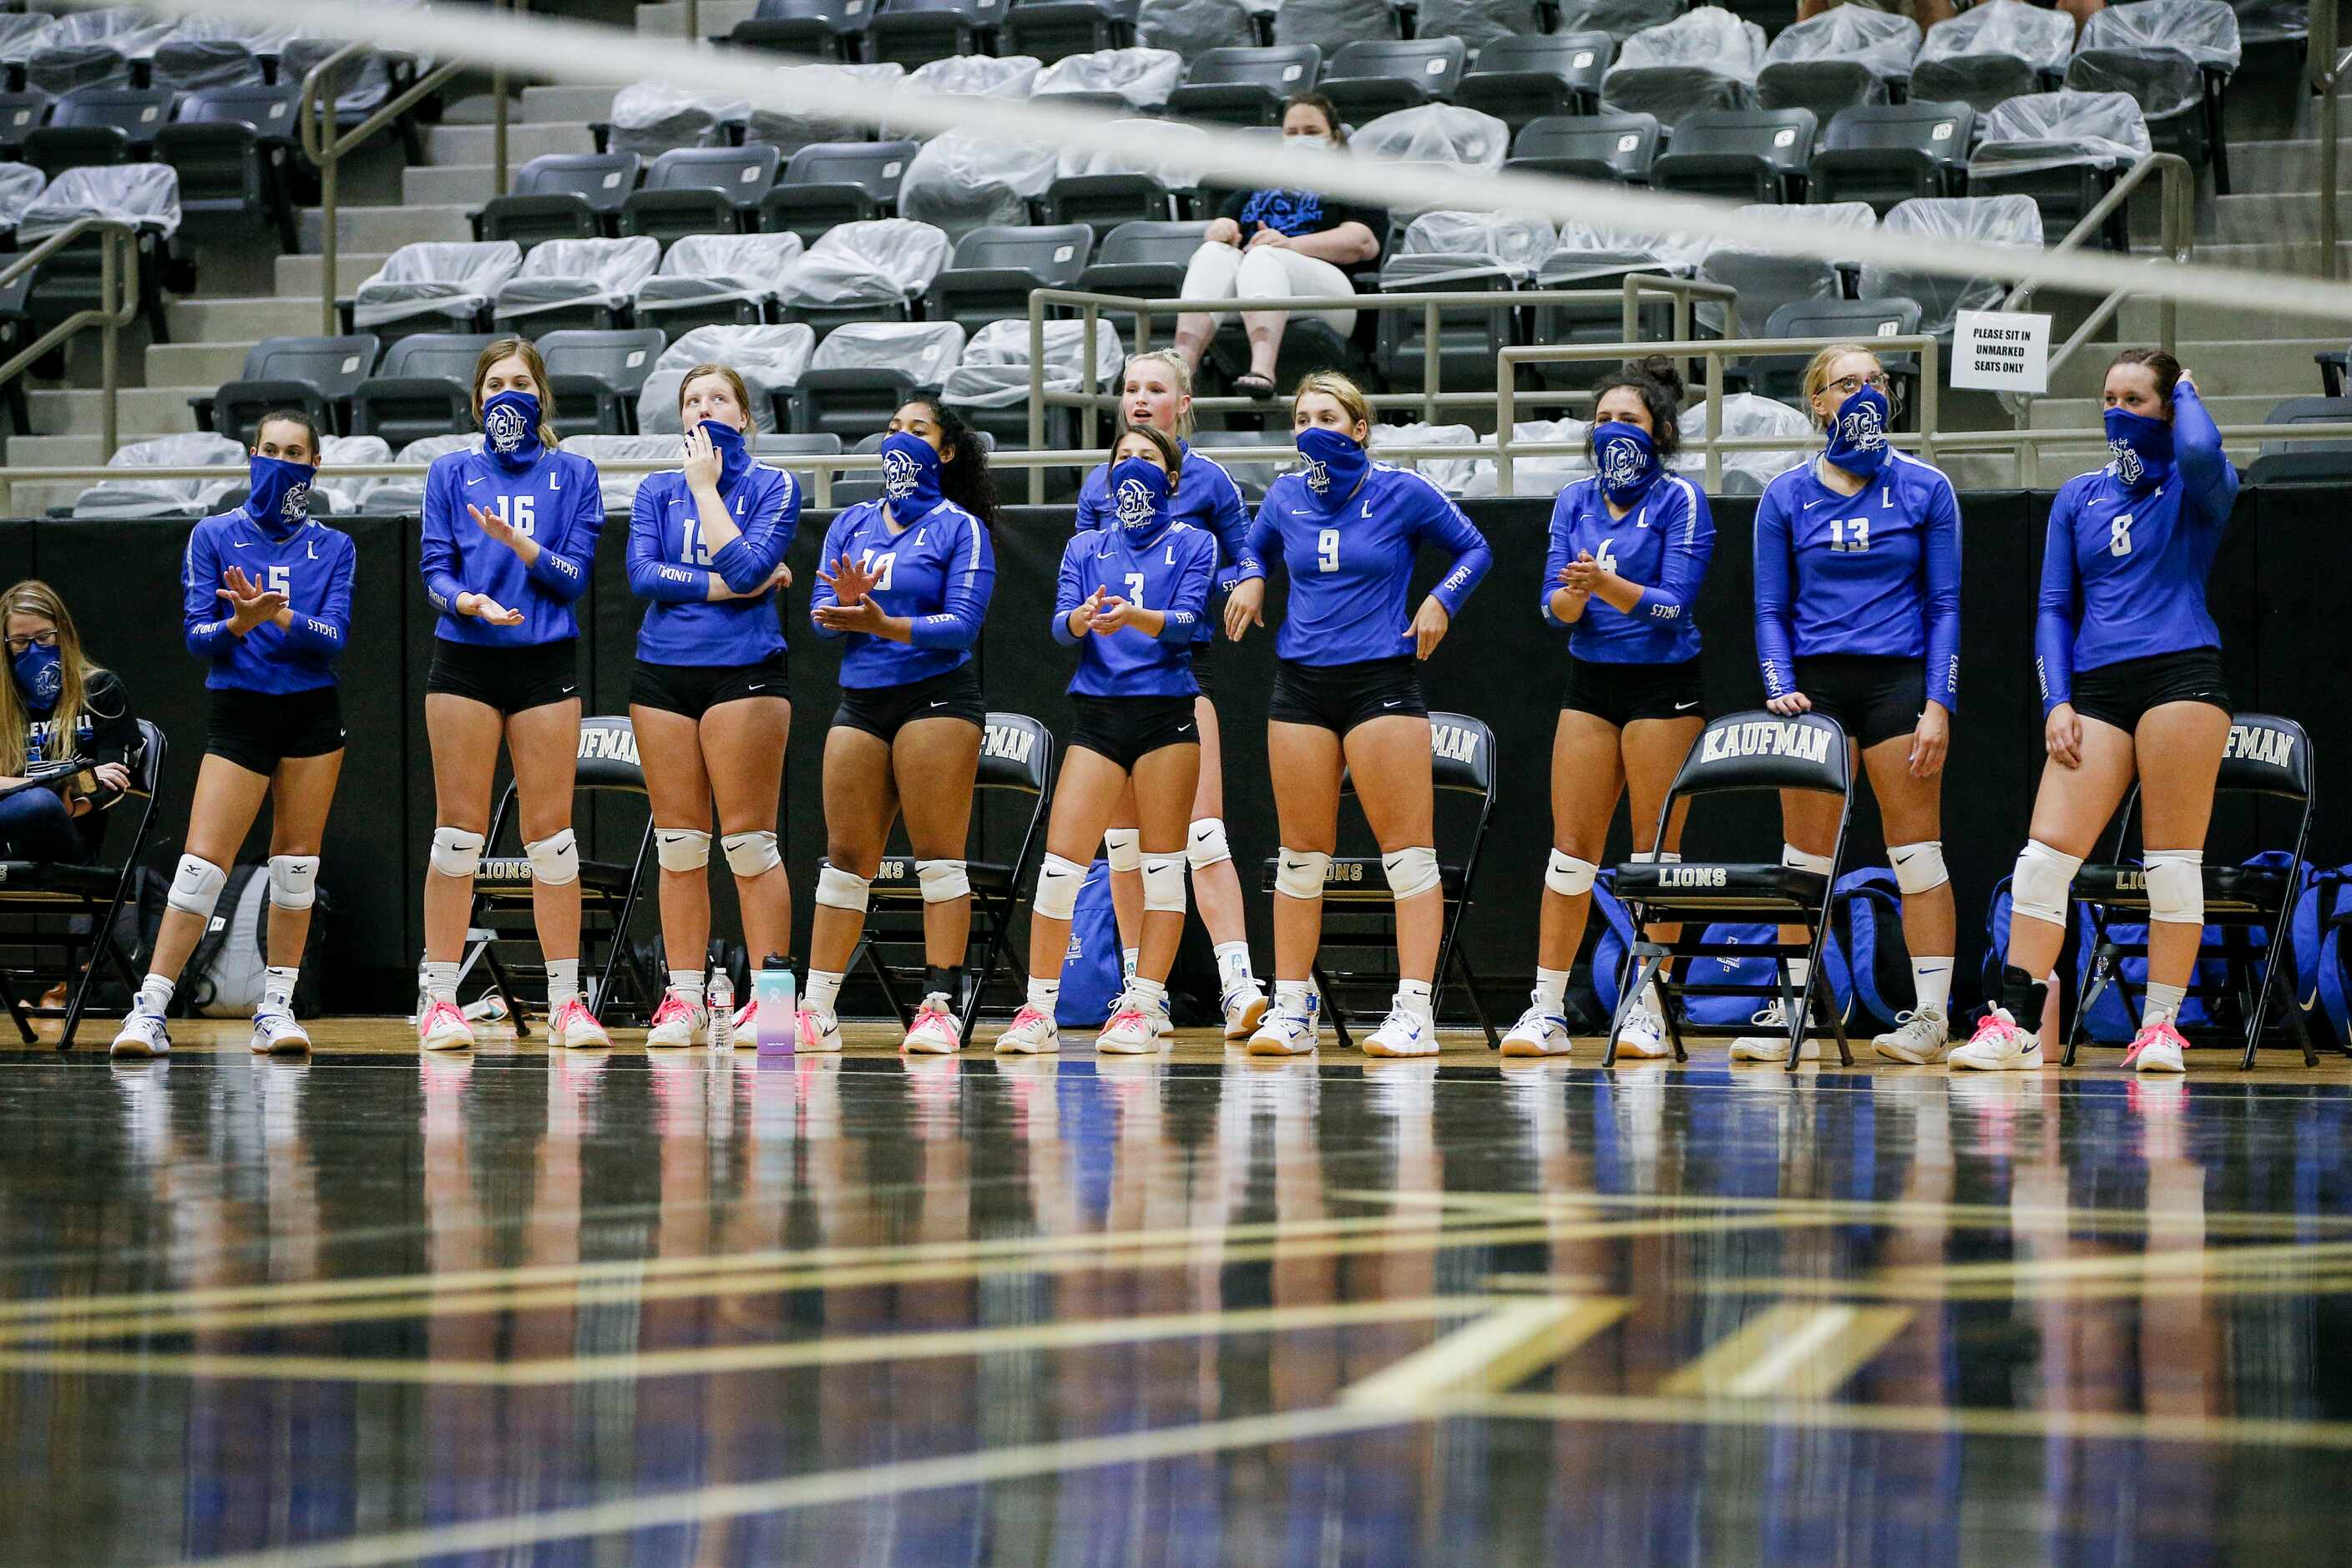 The Lindale varsity volleyball reserve players wear masks as they watch their teammates...